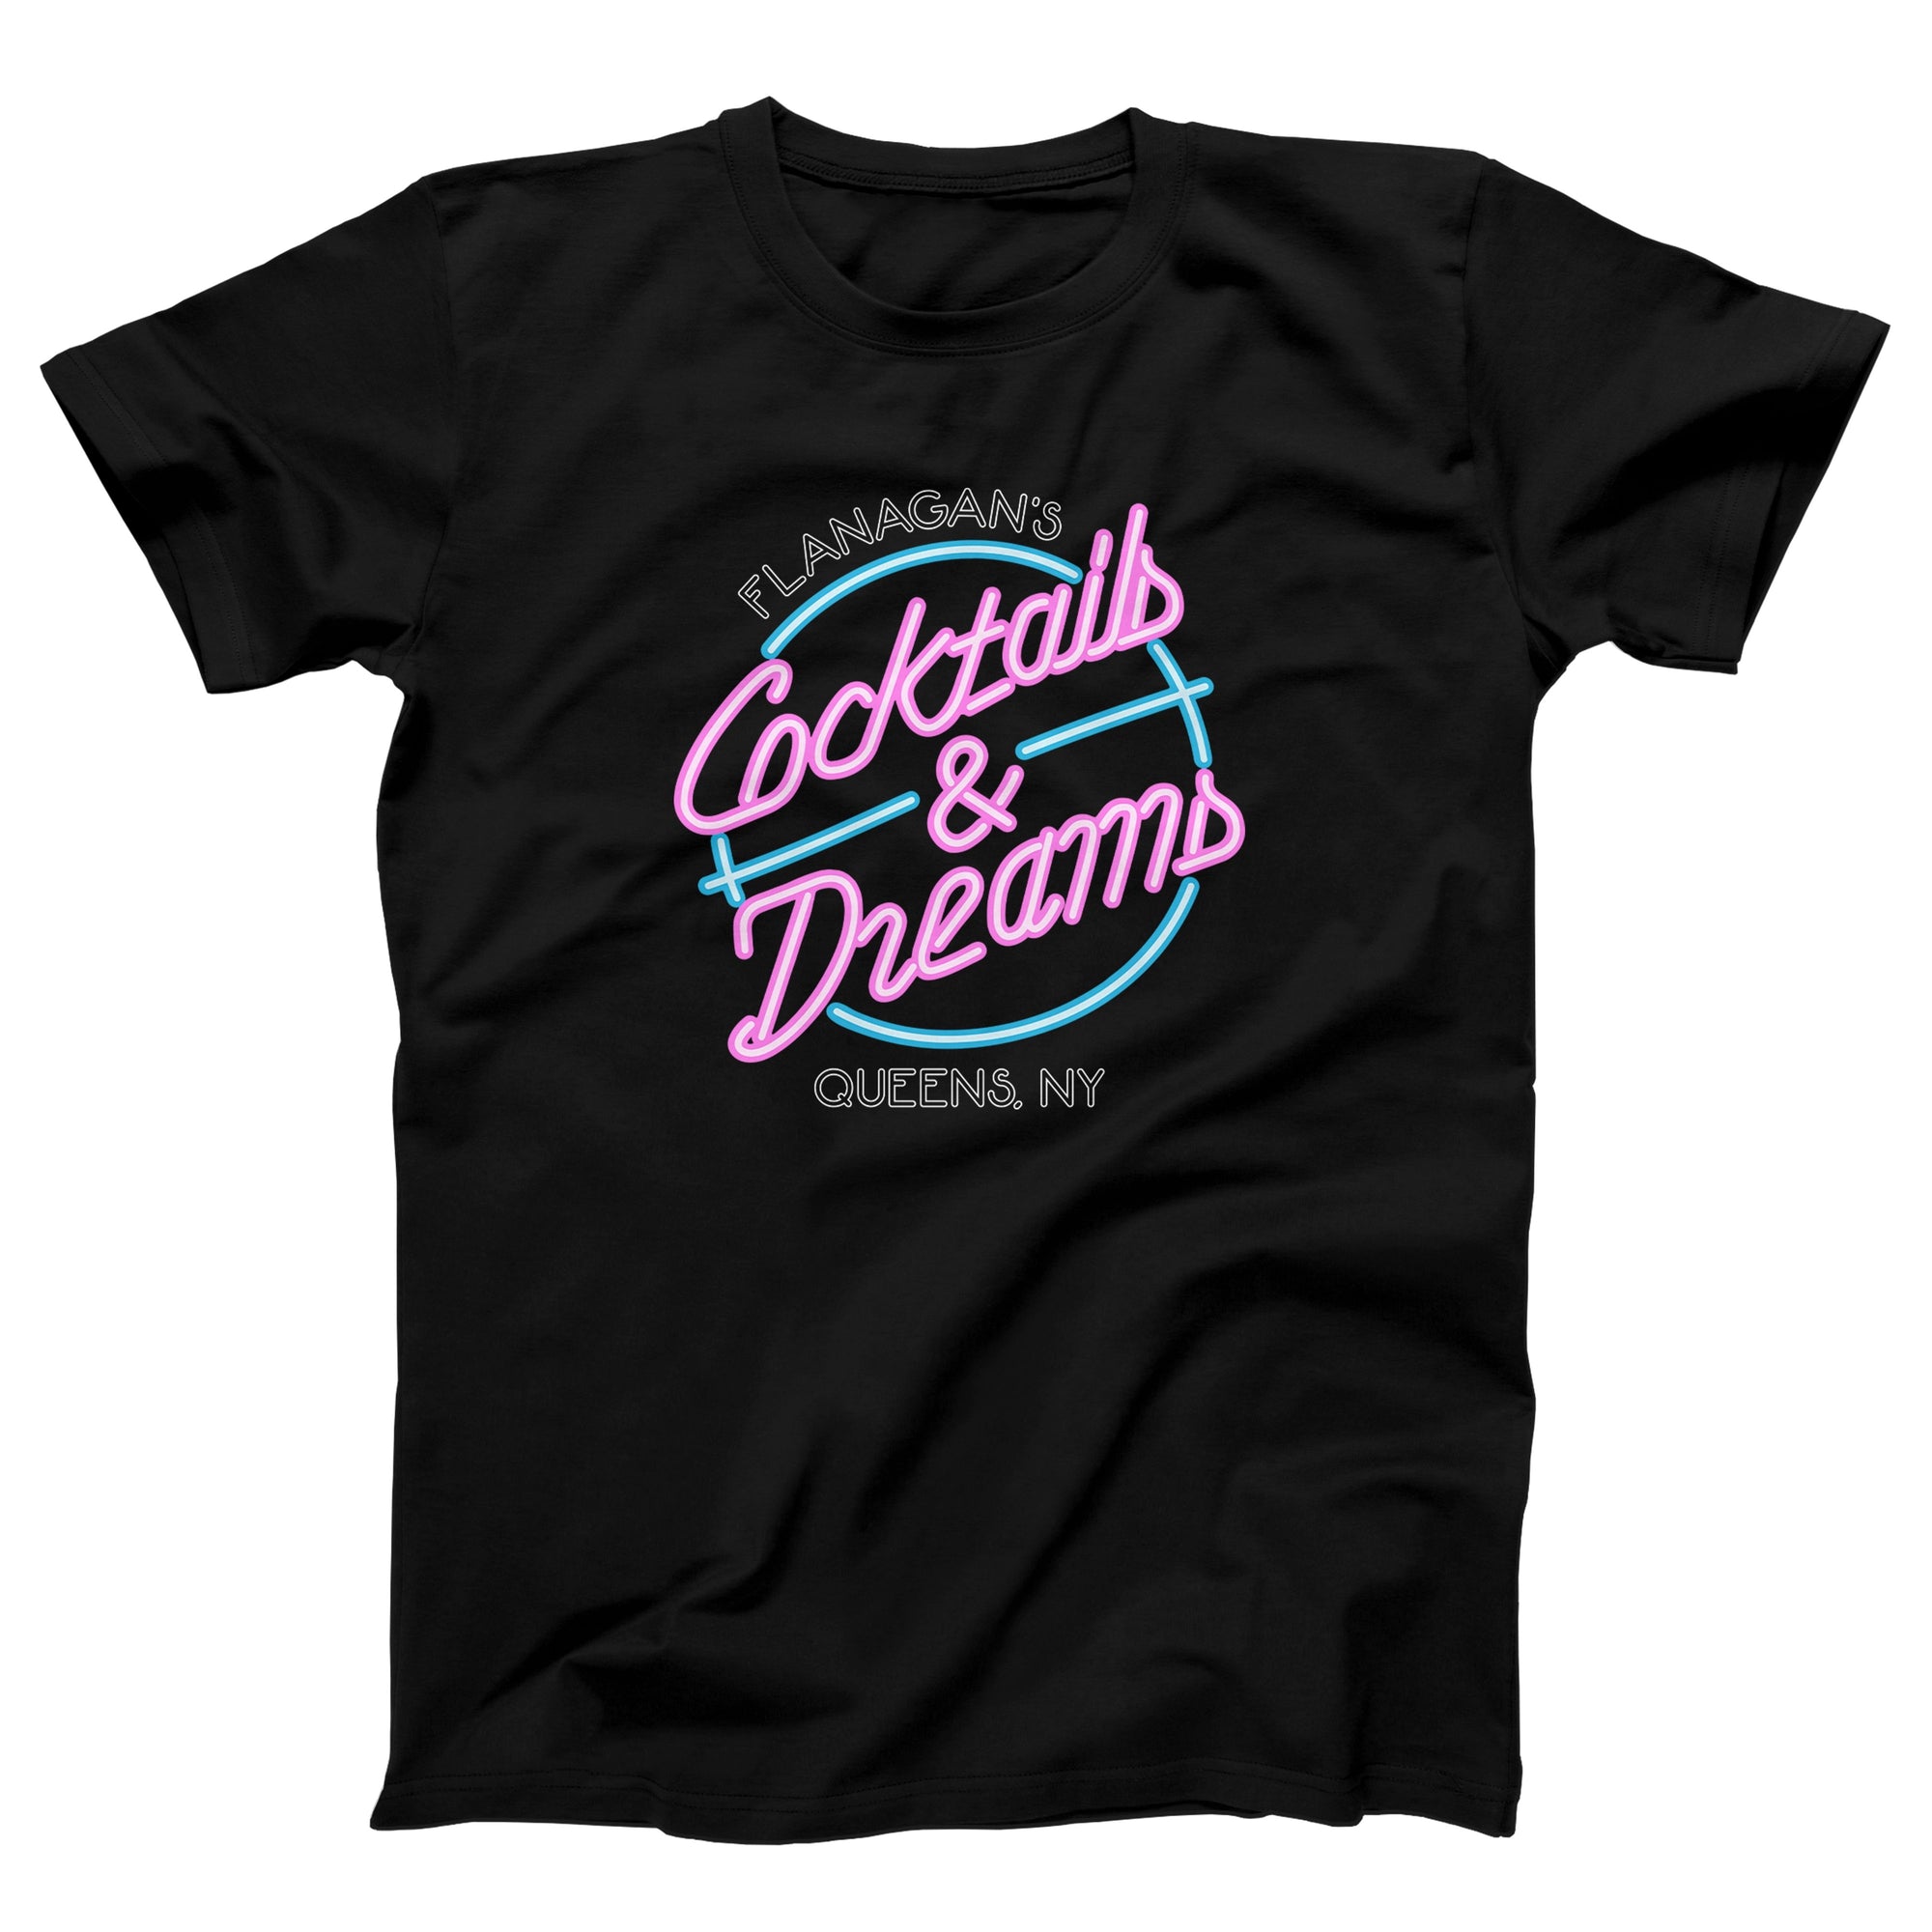 Flanagan's Cocktails and Dreams Adult Unisex T-Shirt - anishphilip